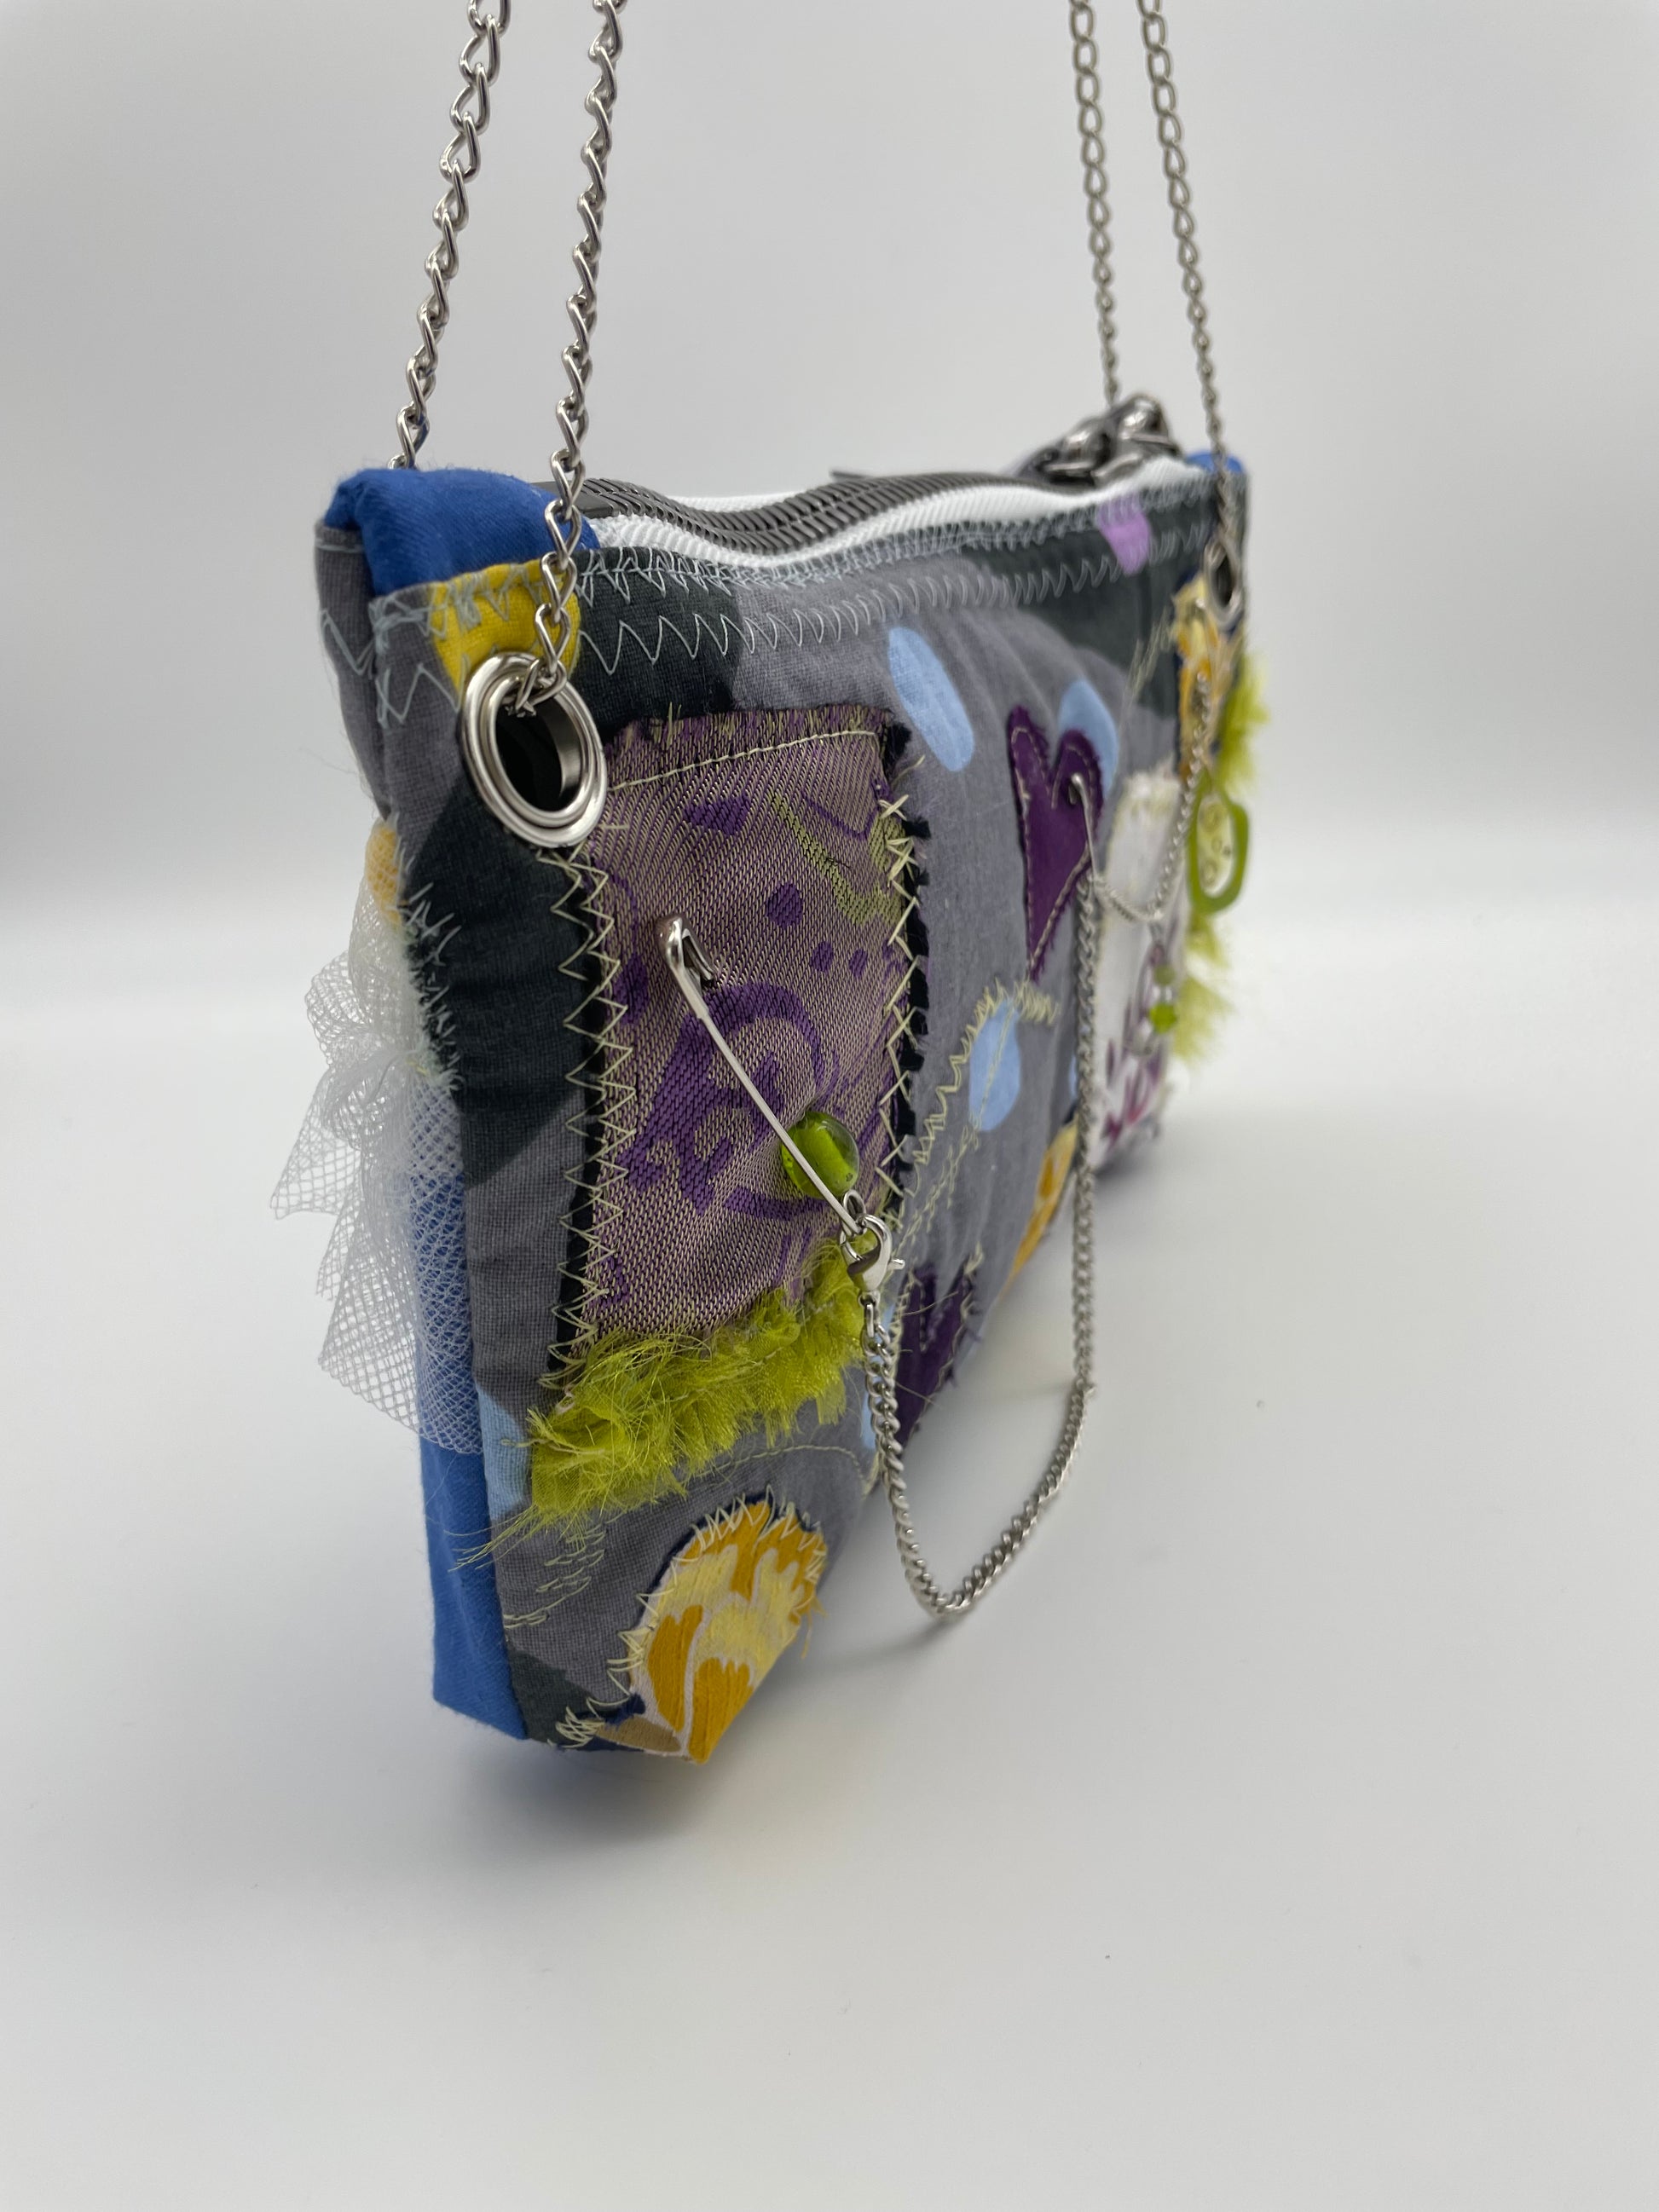 upcycled mini bag zerowaste metal chain handmade discarded fabric leftover patchwork reworked bag upcycling bag